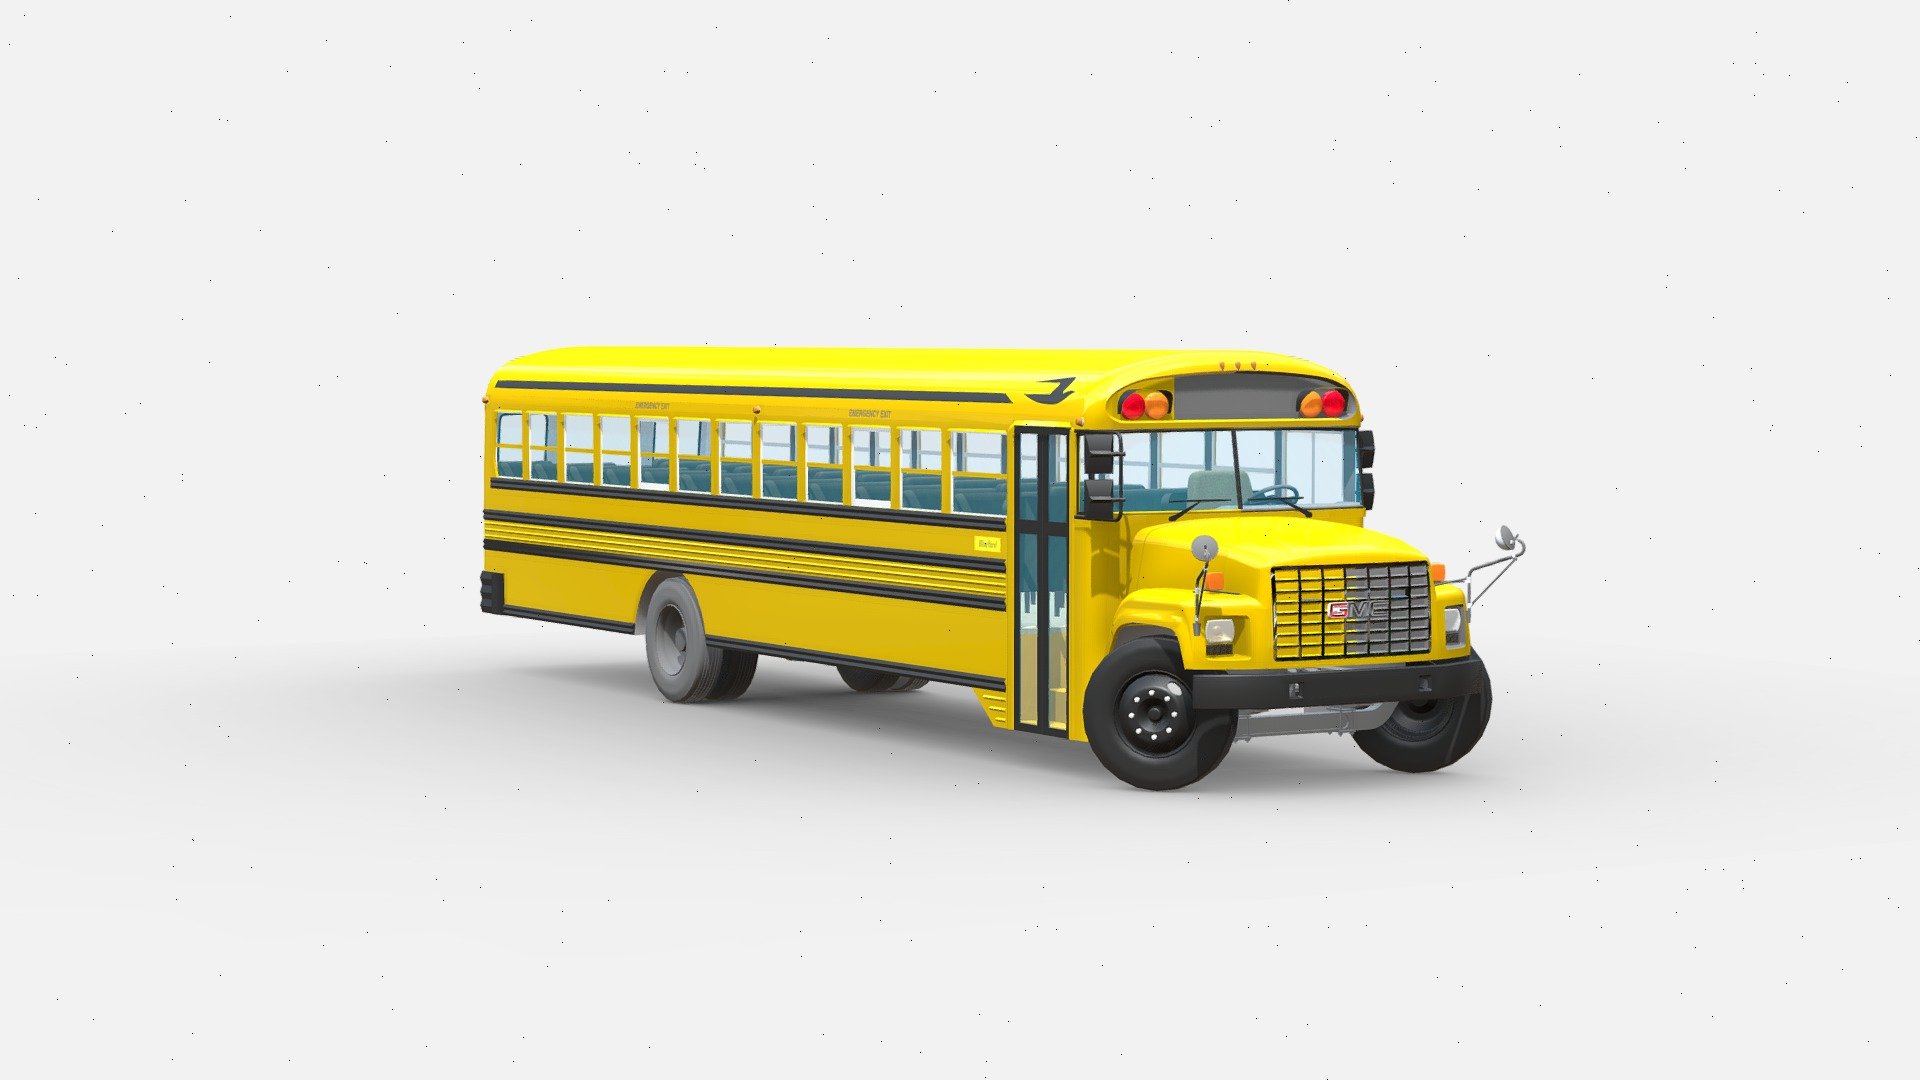 3D model of a school bus, ideal for use in the design of virtual school environments, educational animations or as a decorative element in urban visualizations. The model includes a detailed interior and exterior details, making it a perfect representation of a real school bus 3d model